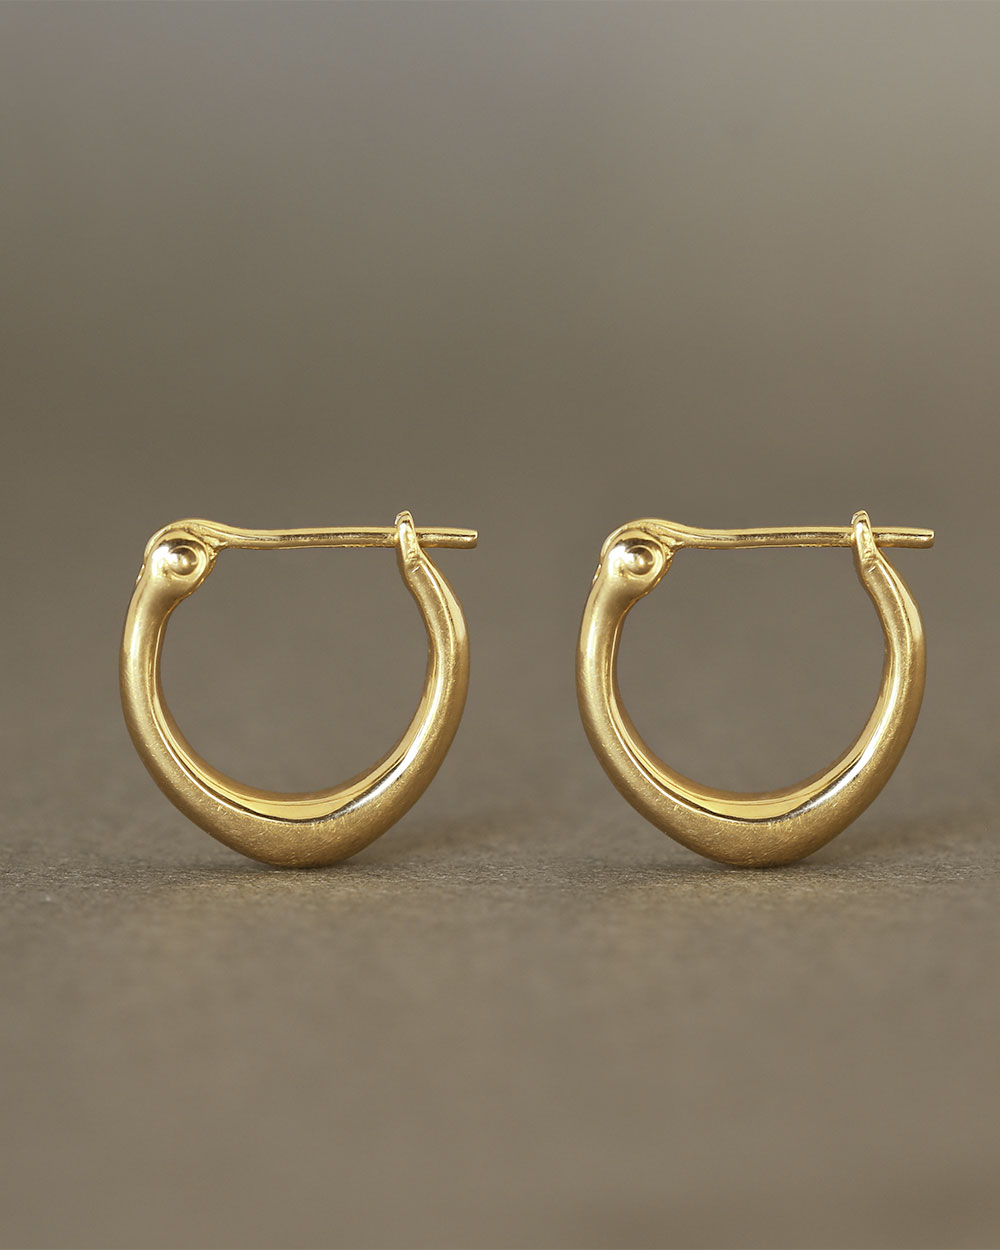 Pair of solid 18k yellow gold hoop earrings with a soft dome shape. Part of the George Rings Capitol Collection.